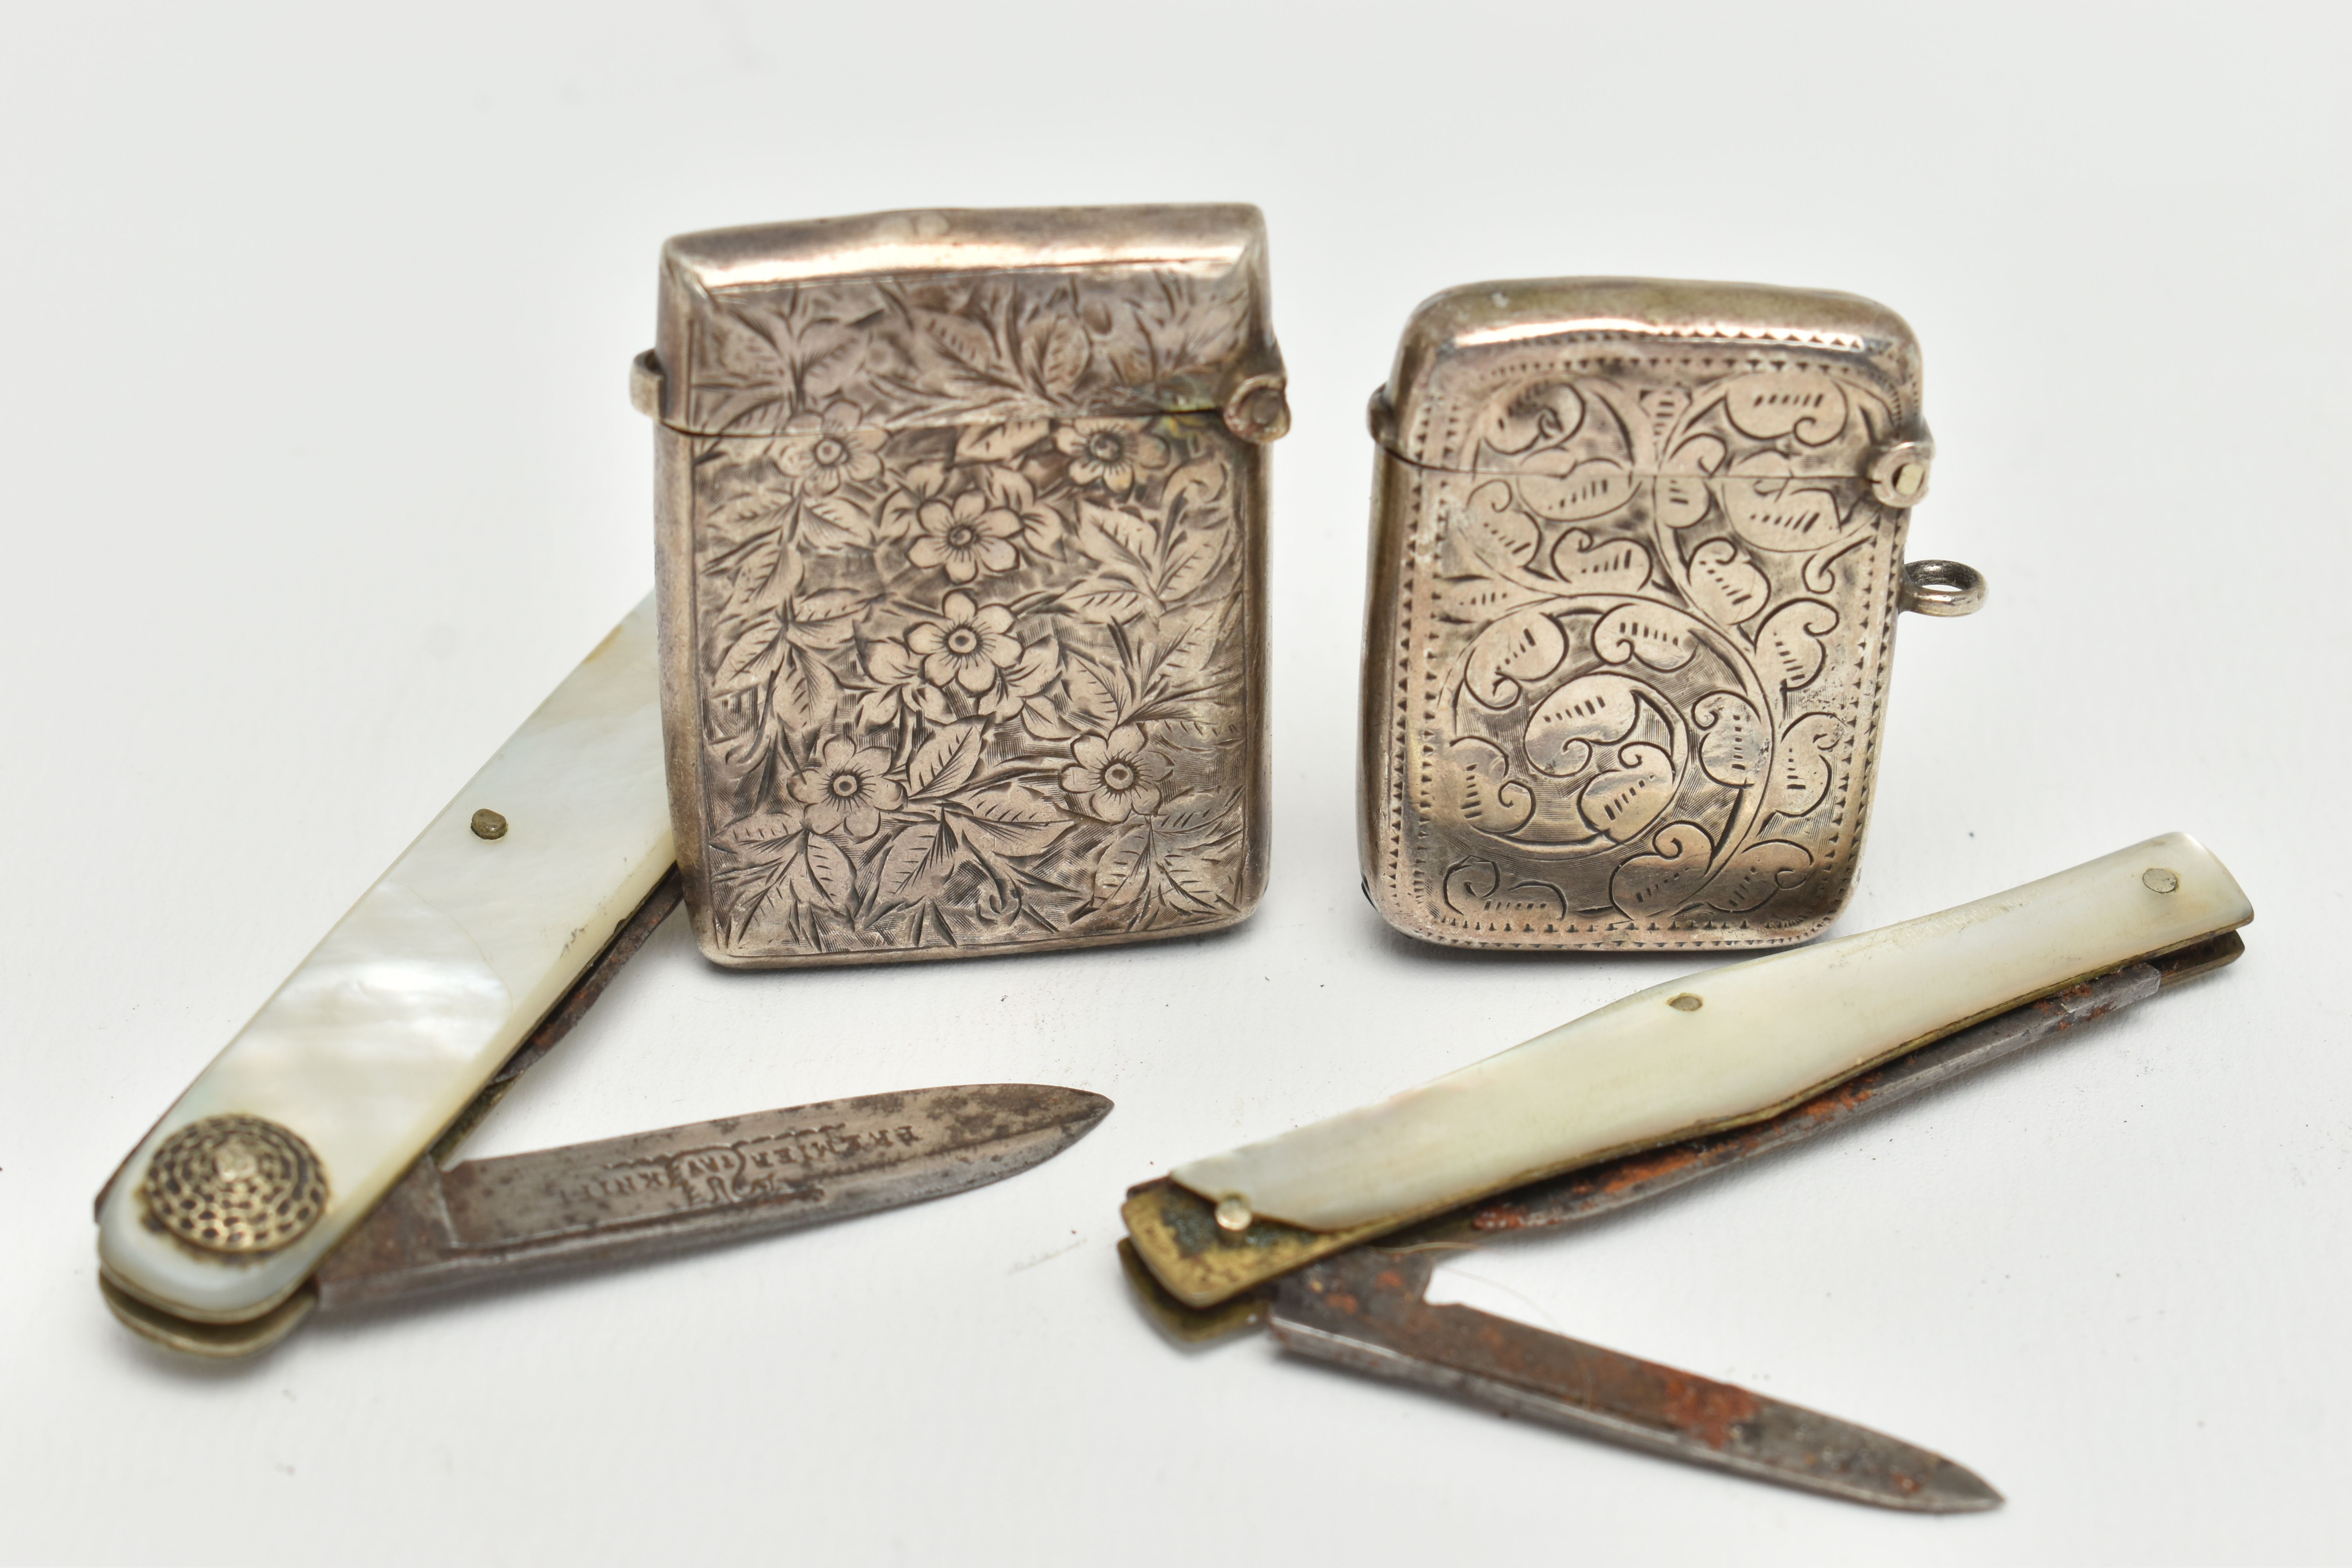 TWO SILVER VESTAS AND TWO MOTHER OF PEARL FRUIT KNIVES, both vestas etched with foliage detail, both - Image 4 of 4